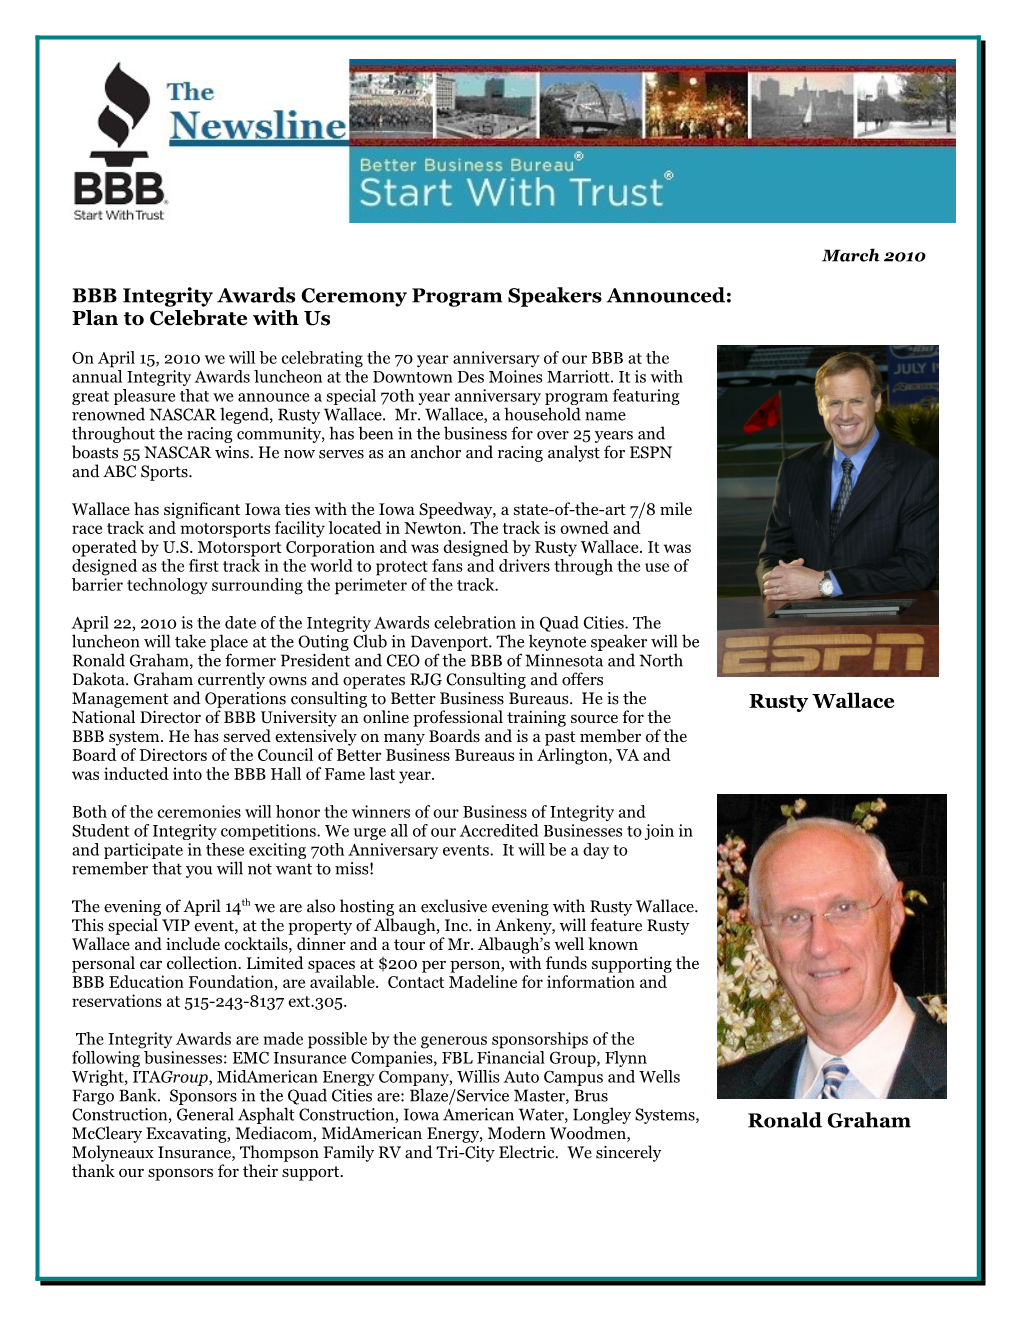 BBB Integrity Awards Ceremony Program Speakers Announced: Plan to Celebrate with Us